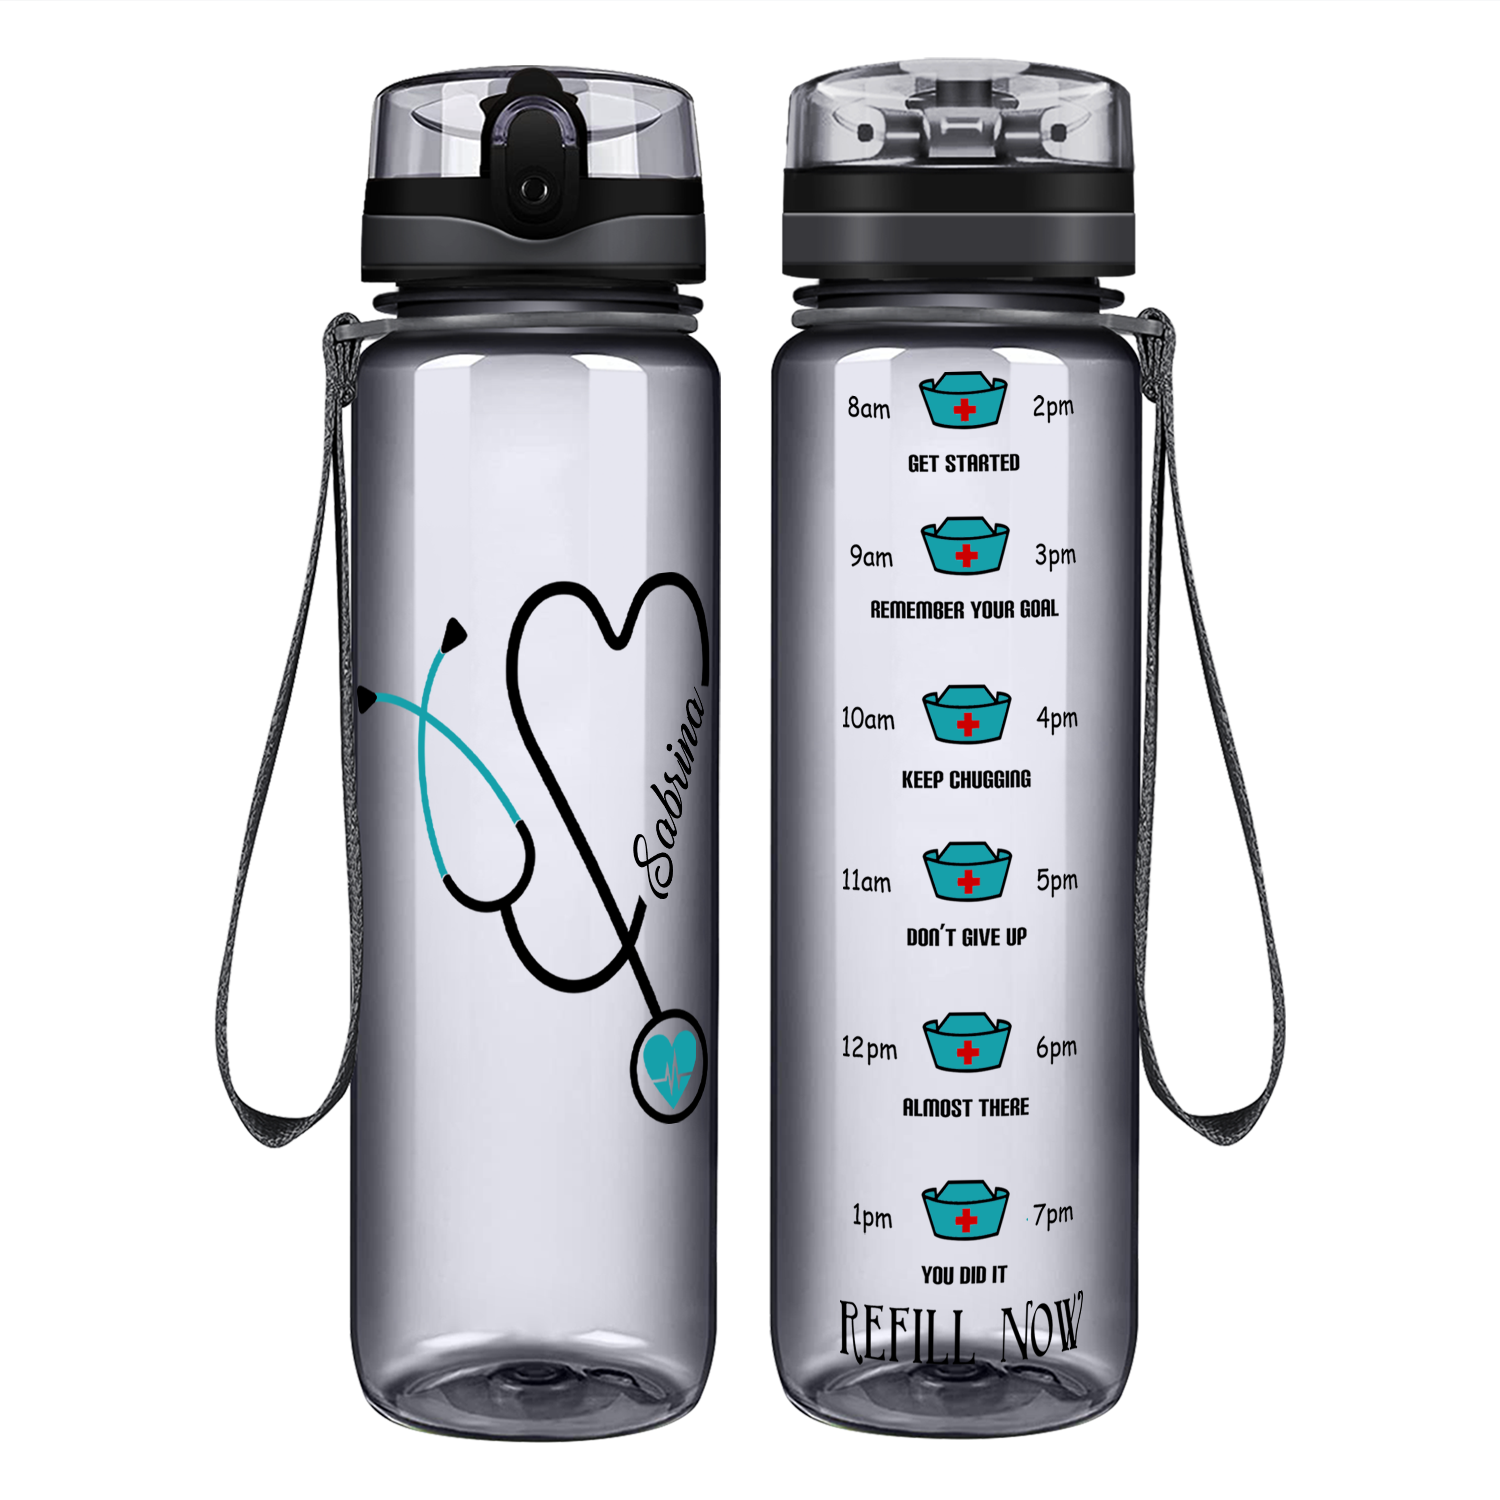  Cuptify Personalized Nurse Water Bottle Blue Stethoscope Heart  on Fuchsia Gloss 32 oz 1 Liter Motivational Tracking Water Bottle with Time  Marker Gift for Nurses : Sports & Outdoors